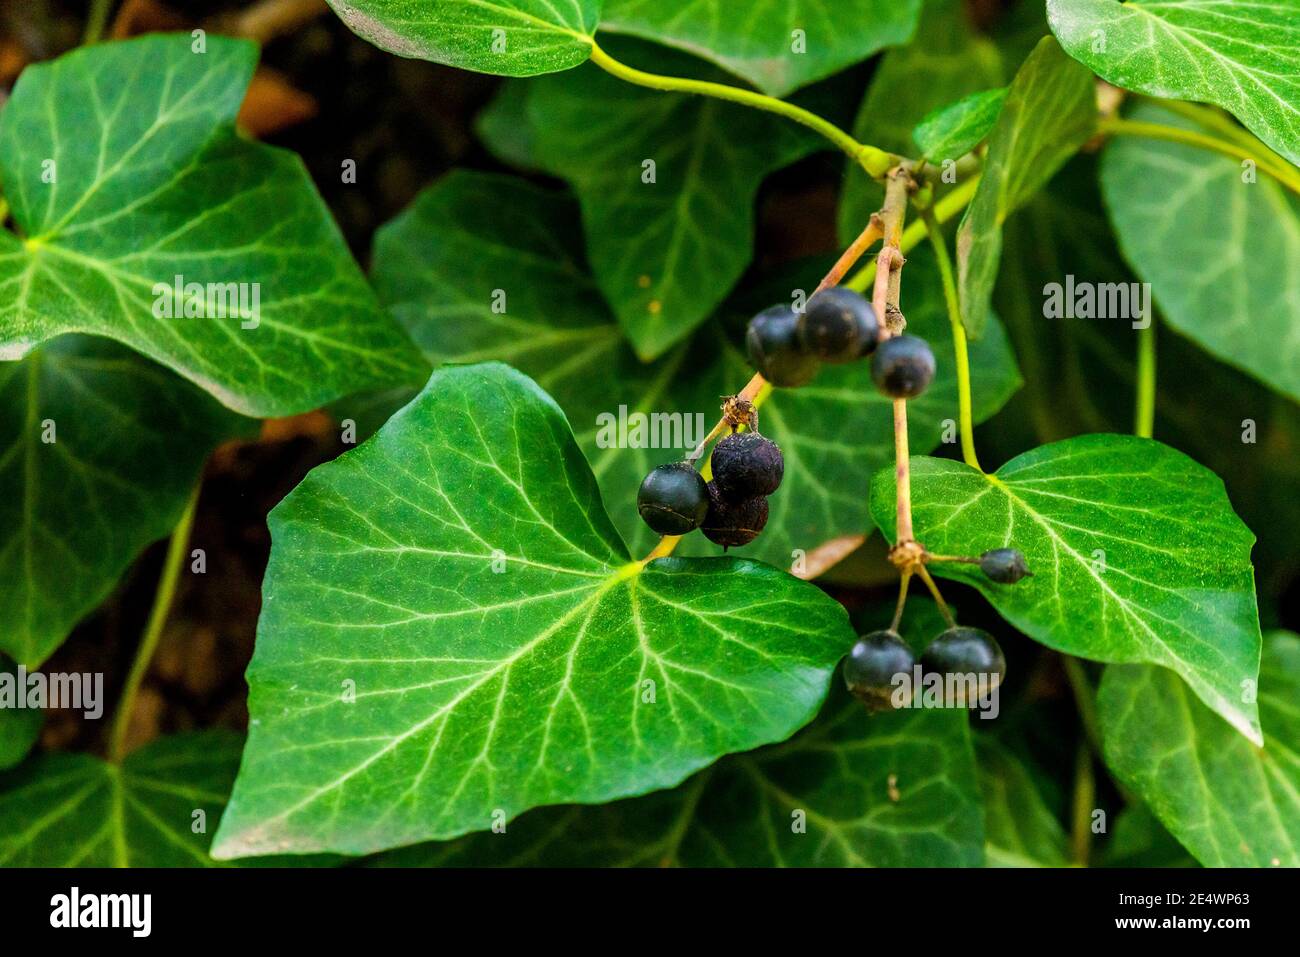 Berries or fruits of Ivy or Hedera helix. Stock Photo